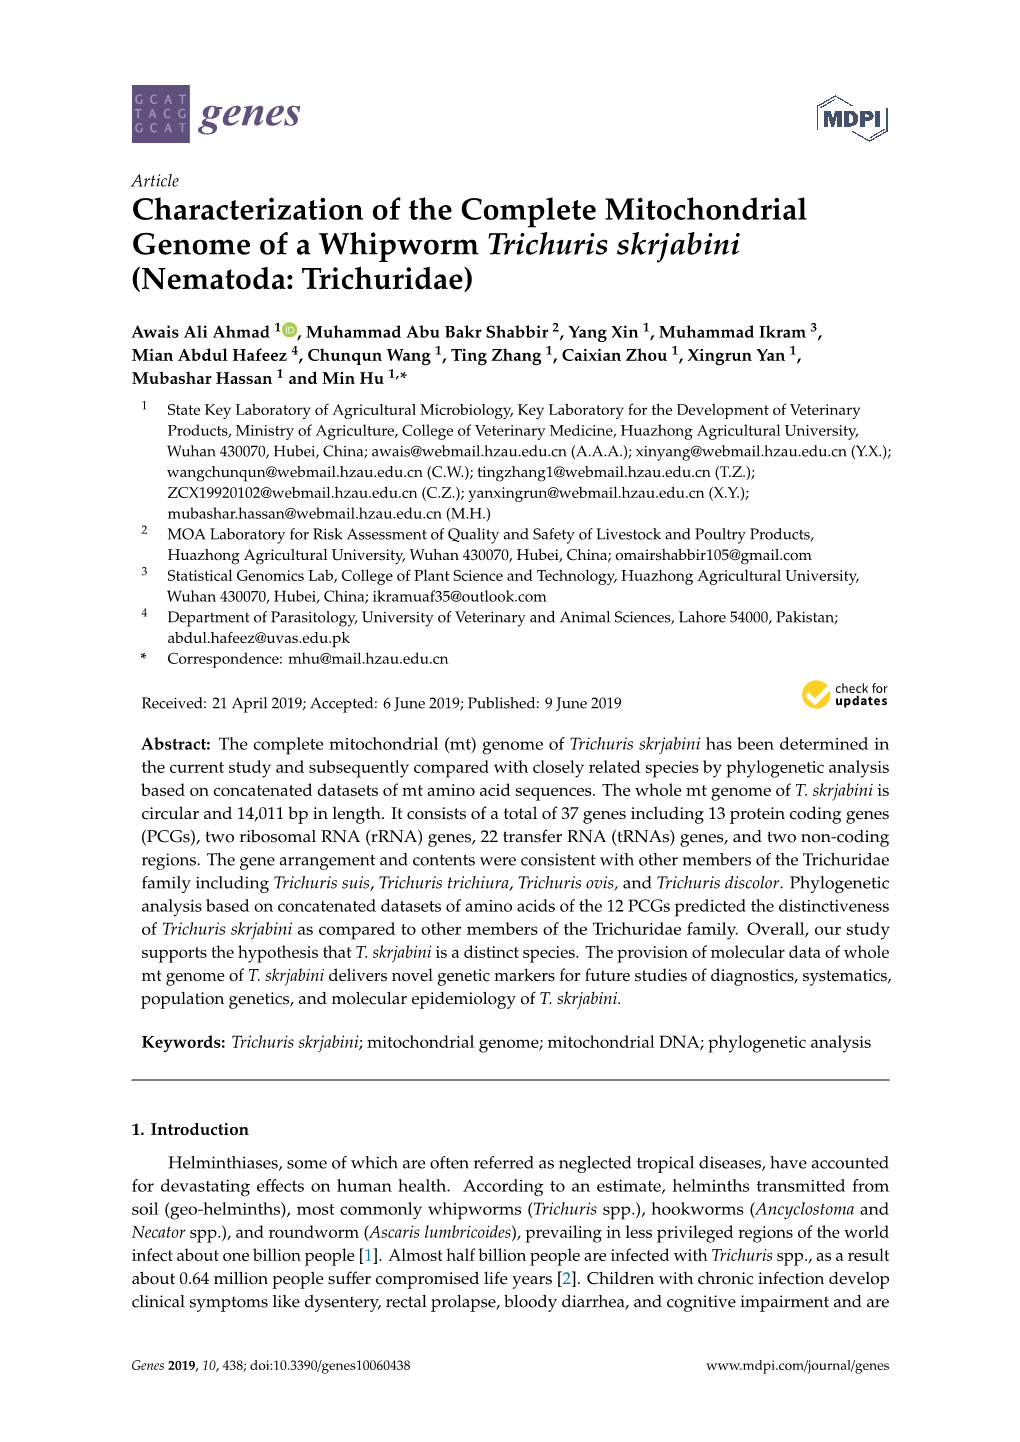 Characterization of the Complete Mitochondrial Genome of a Whipworm Trichuris Skrjabini (Nematoda: Trichuridae)